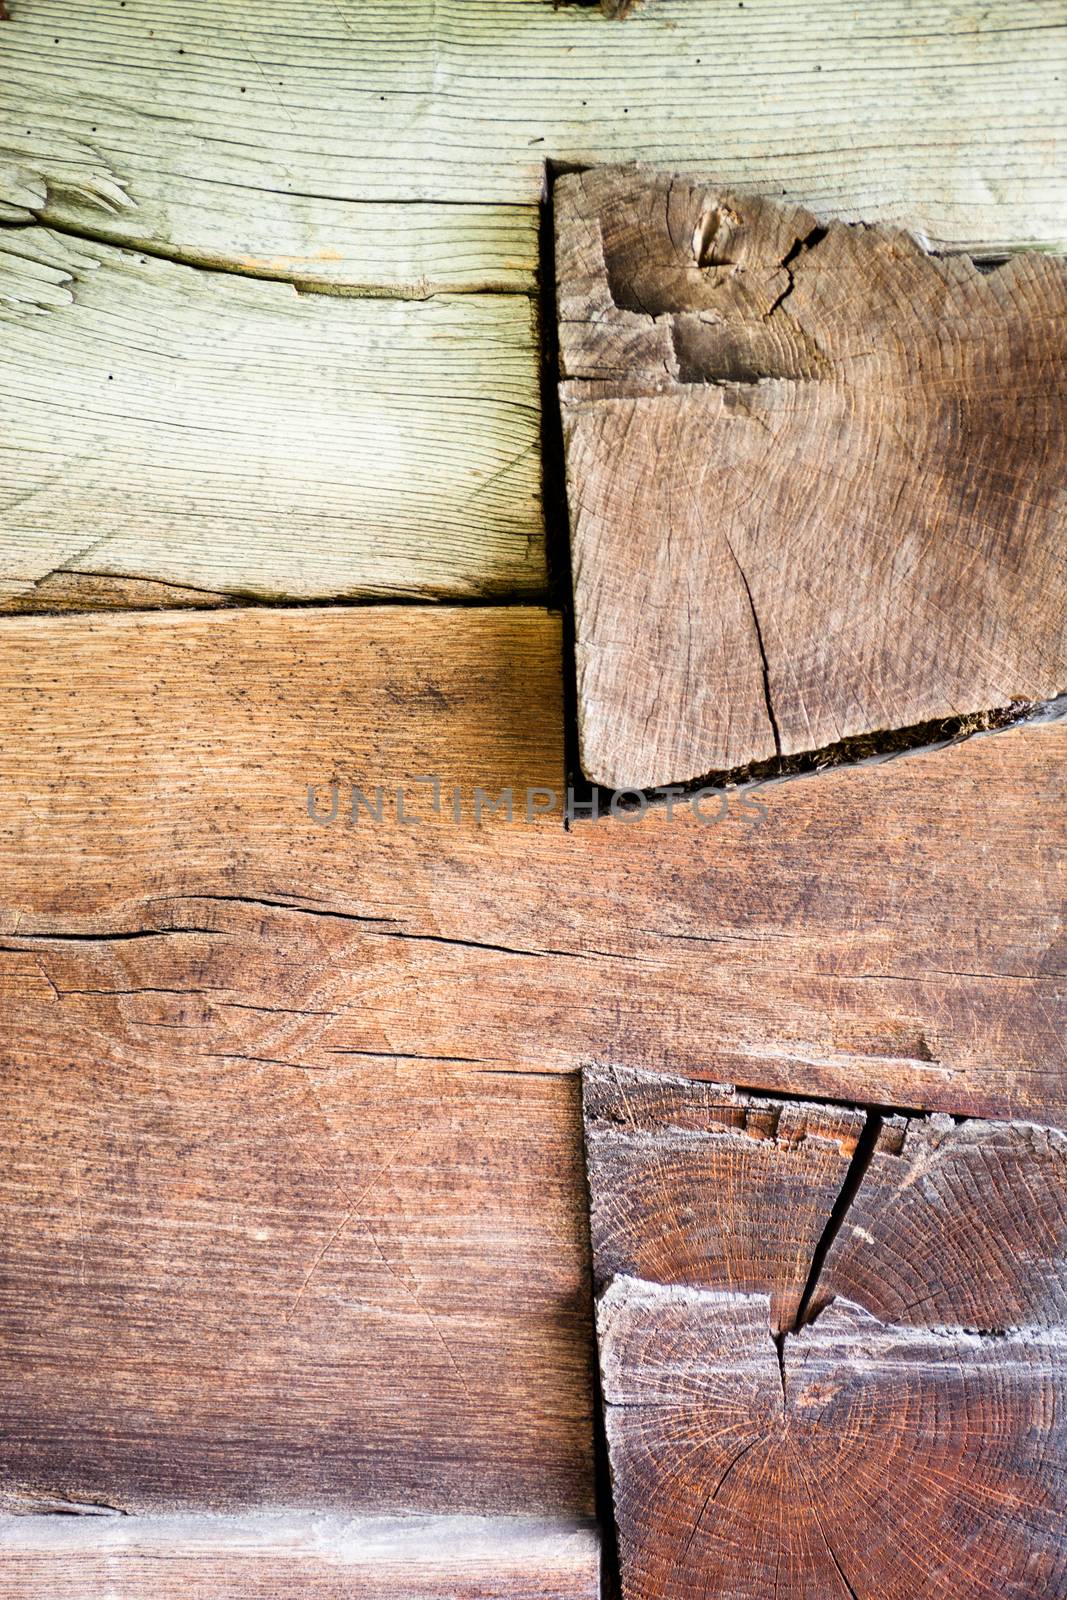 The corner of the old log house by rootstocks